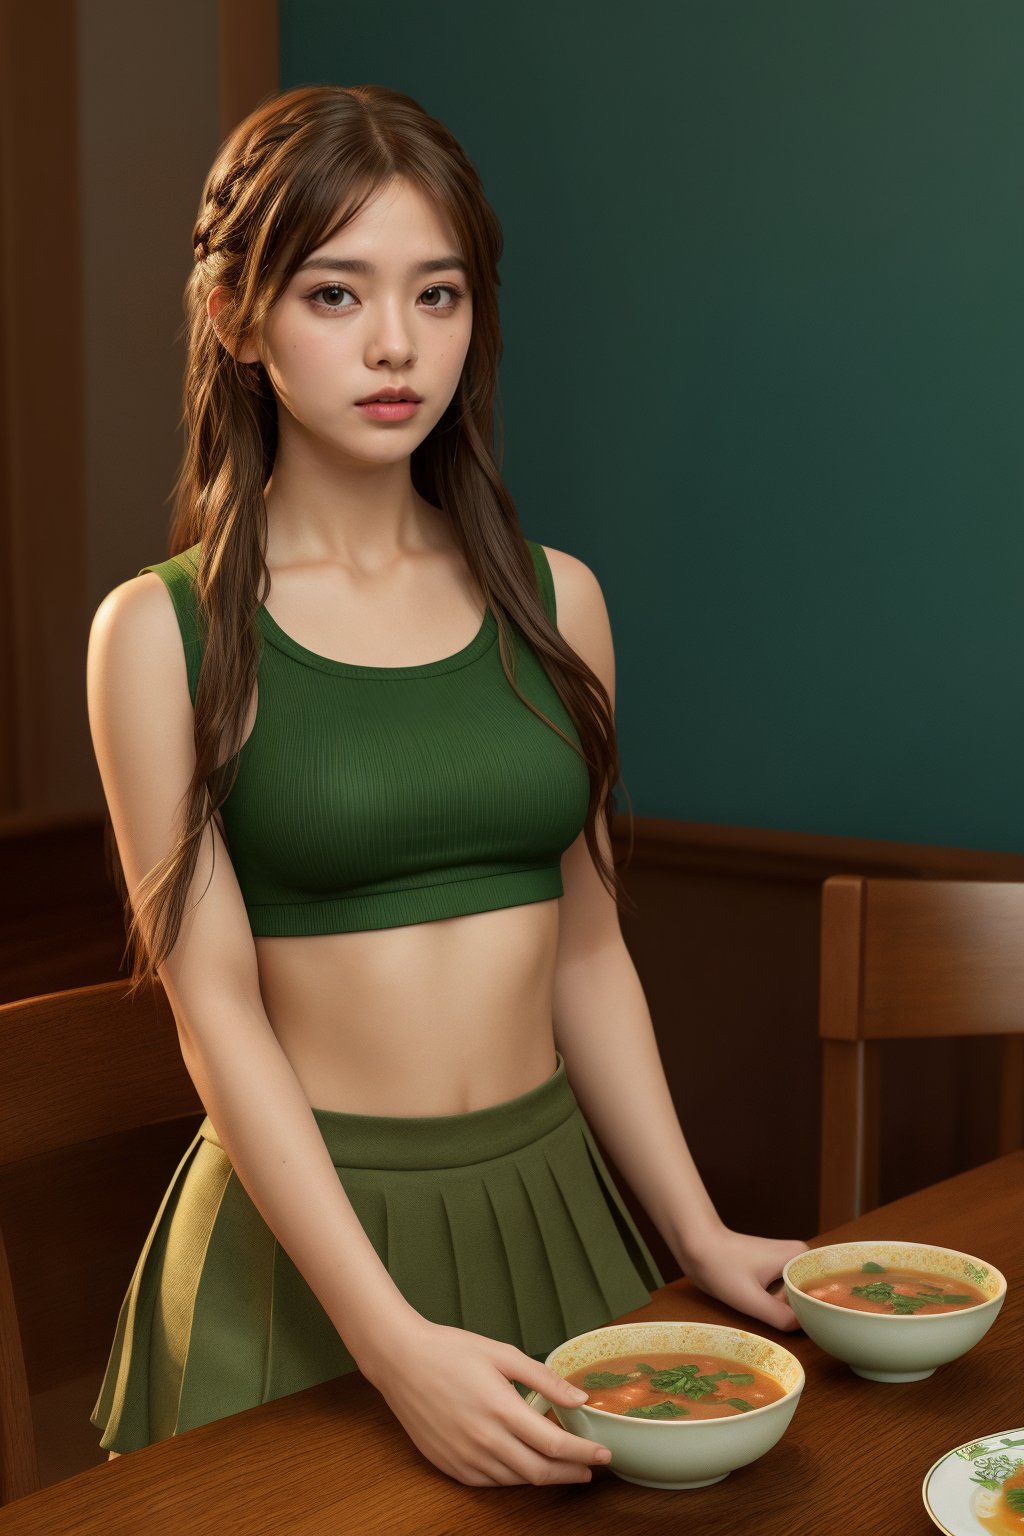 
masterpiece, best quality, photorealistic, raw photo, 1girl, long hair, green crop top and skirt serious expression, detailed skin. sitting on a chair at  dinner table with a bowl of soup in her hands
